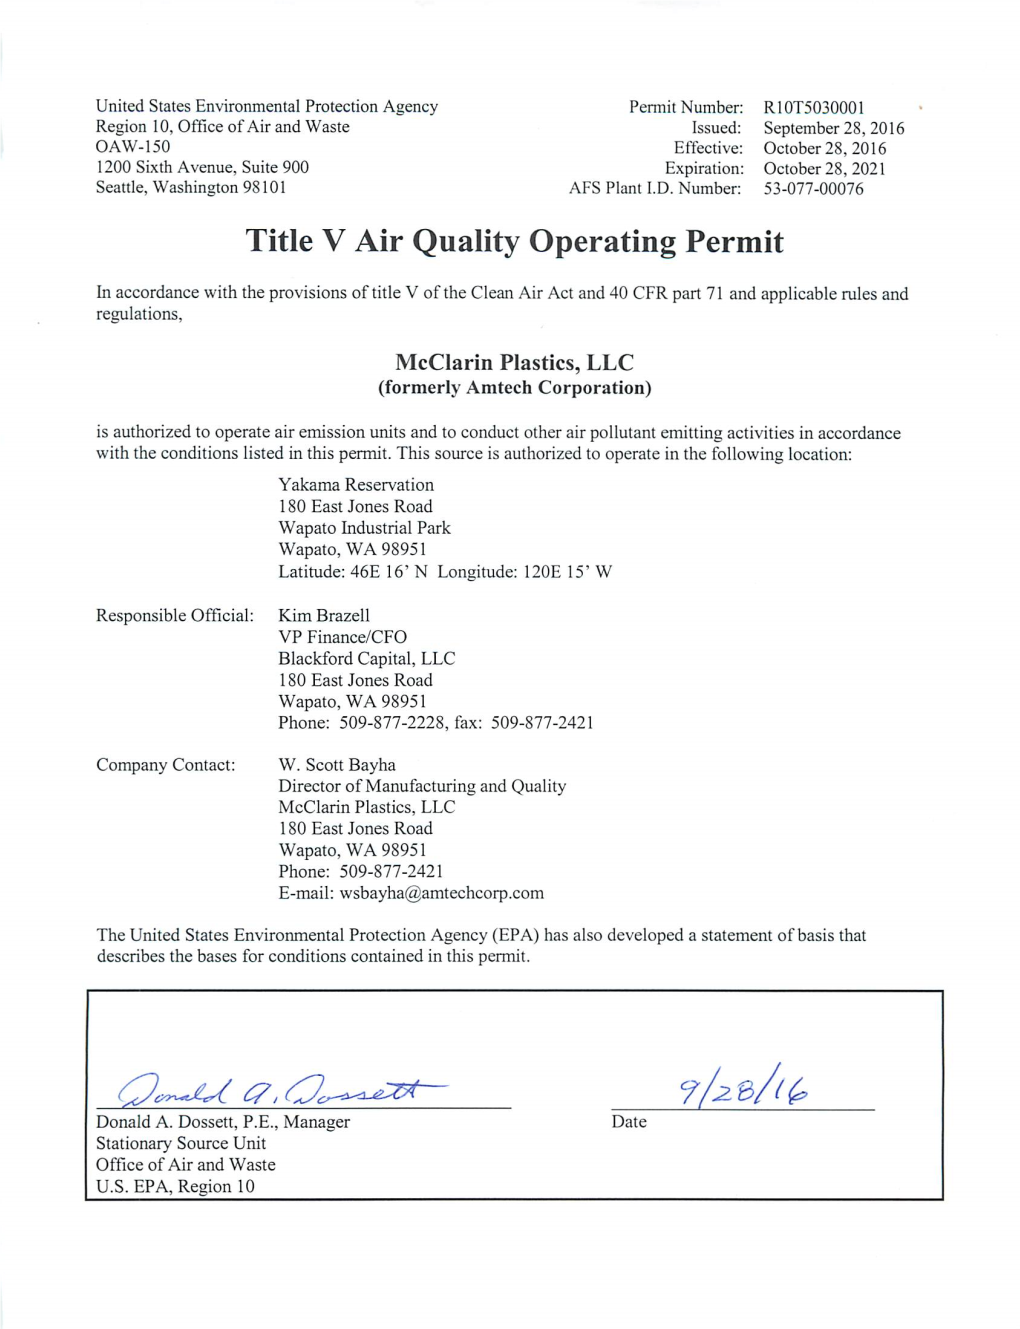 Title V Air Quality Operating Permit for Mcclarin Plastics, LLC in Wapato